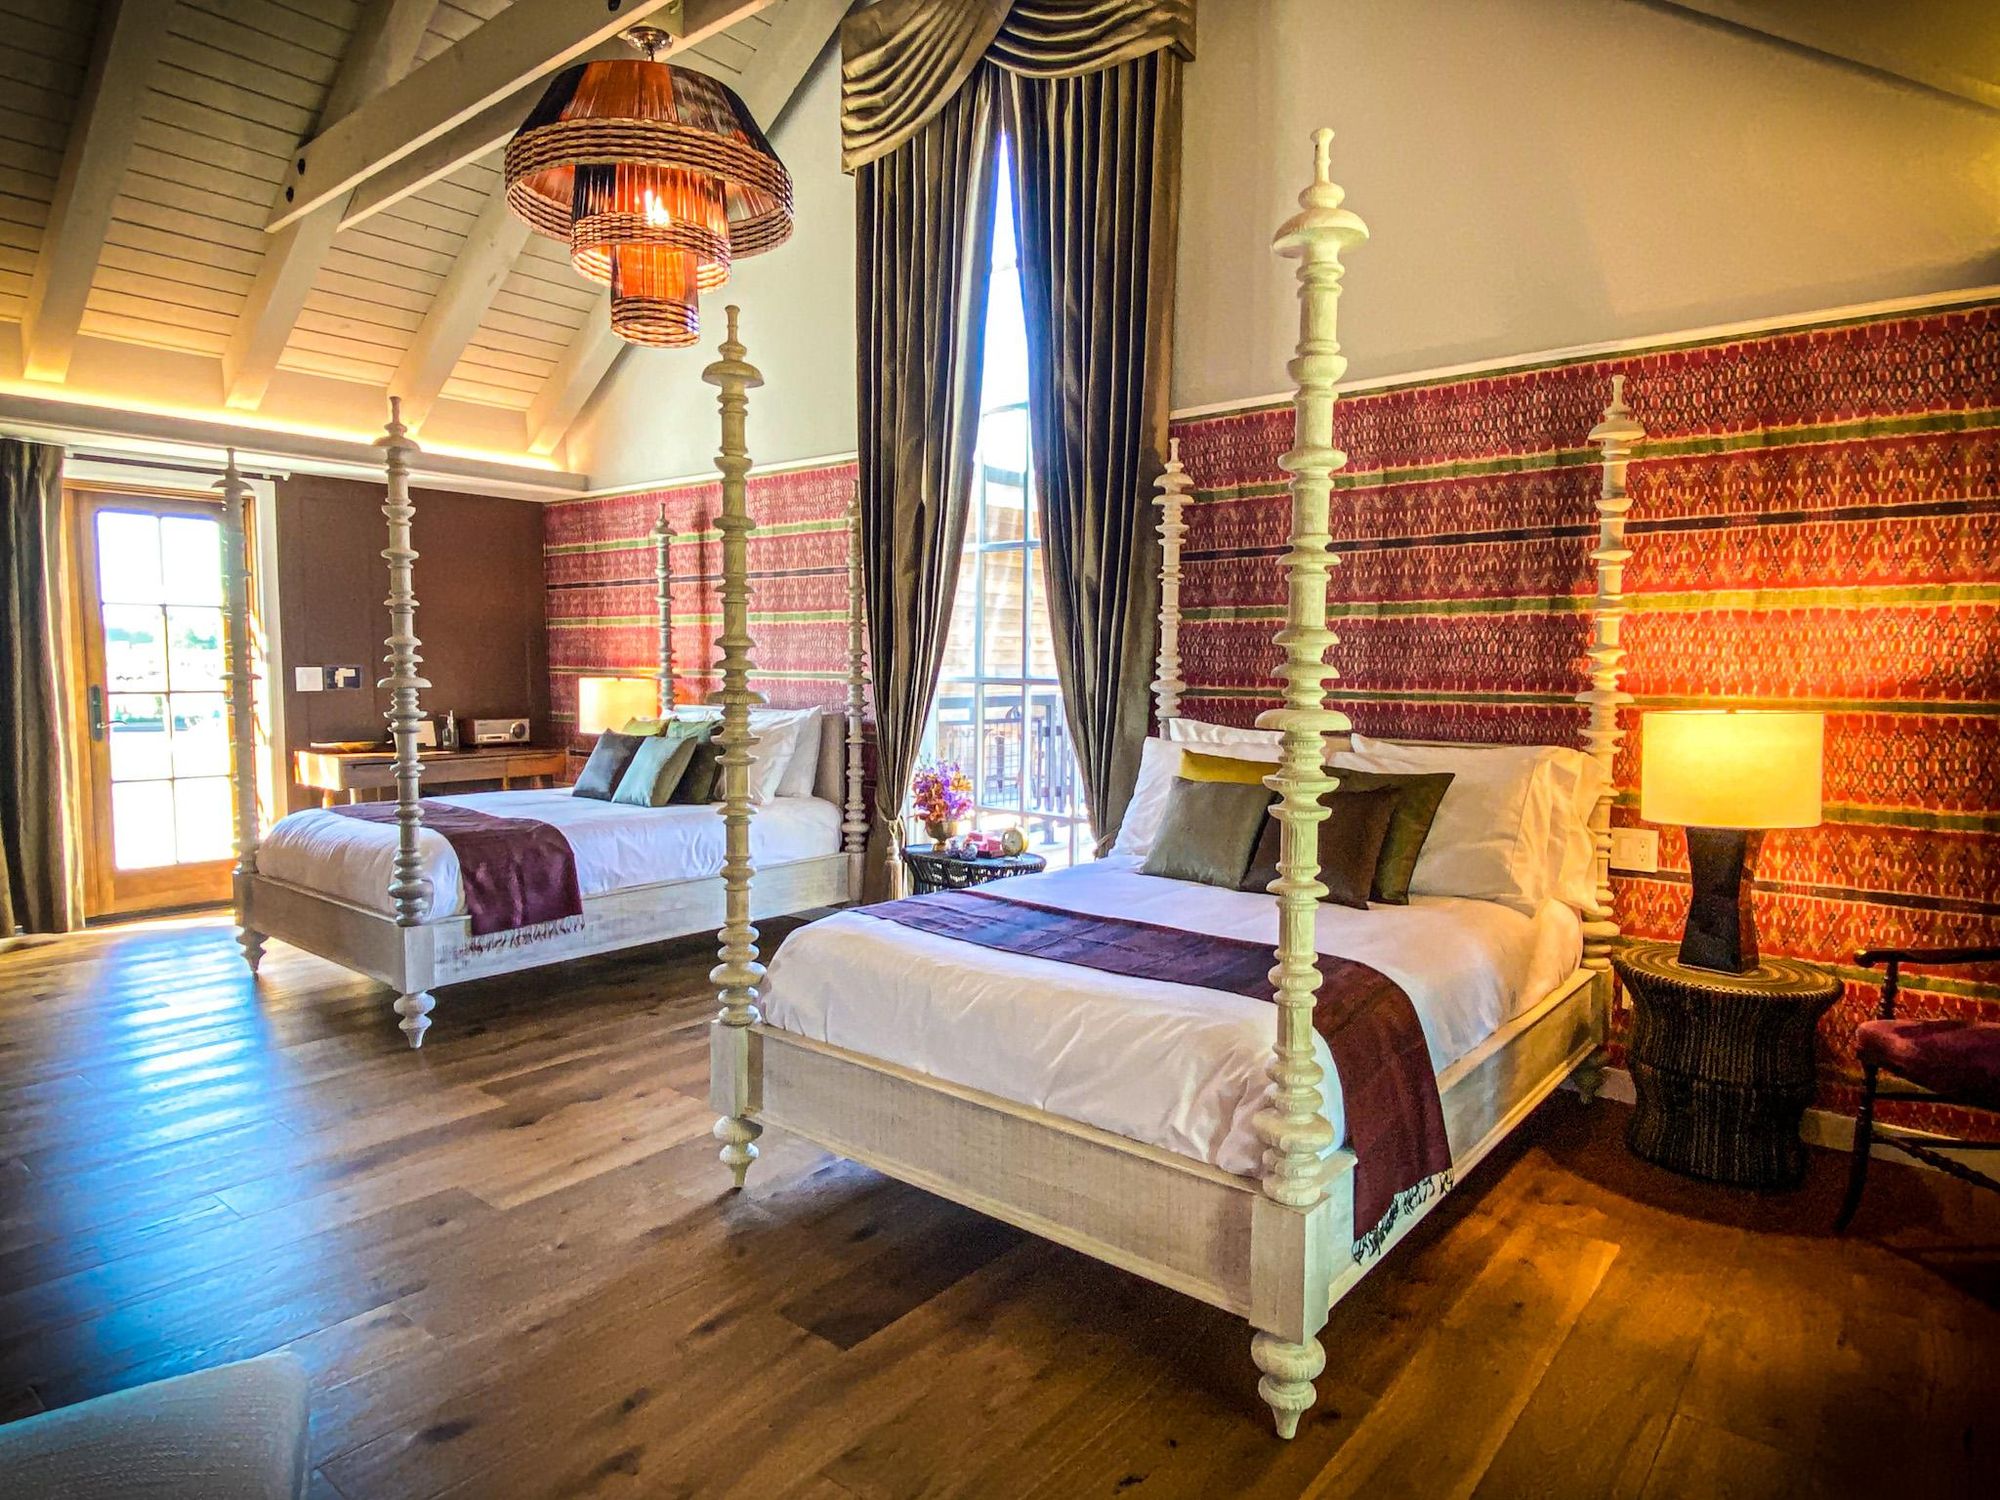 Dreaming of Thailand? Bann, Napa's newest hotel, is the next best thing